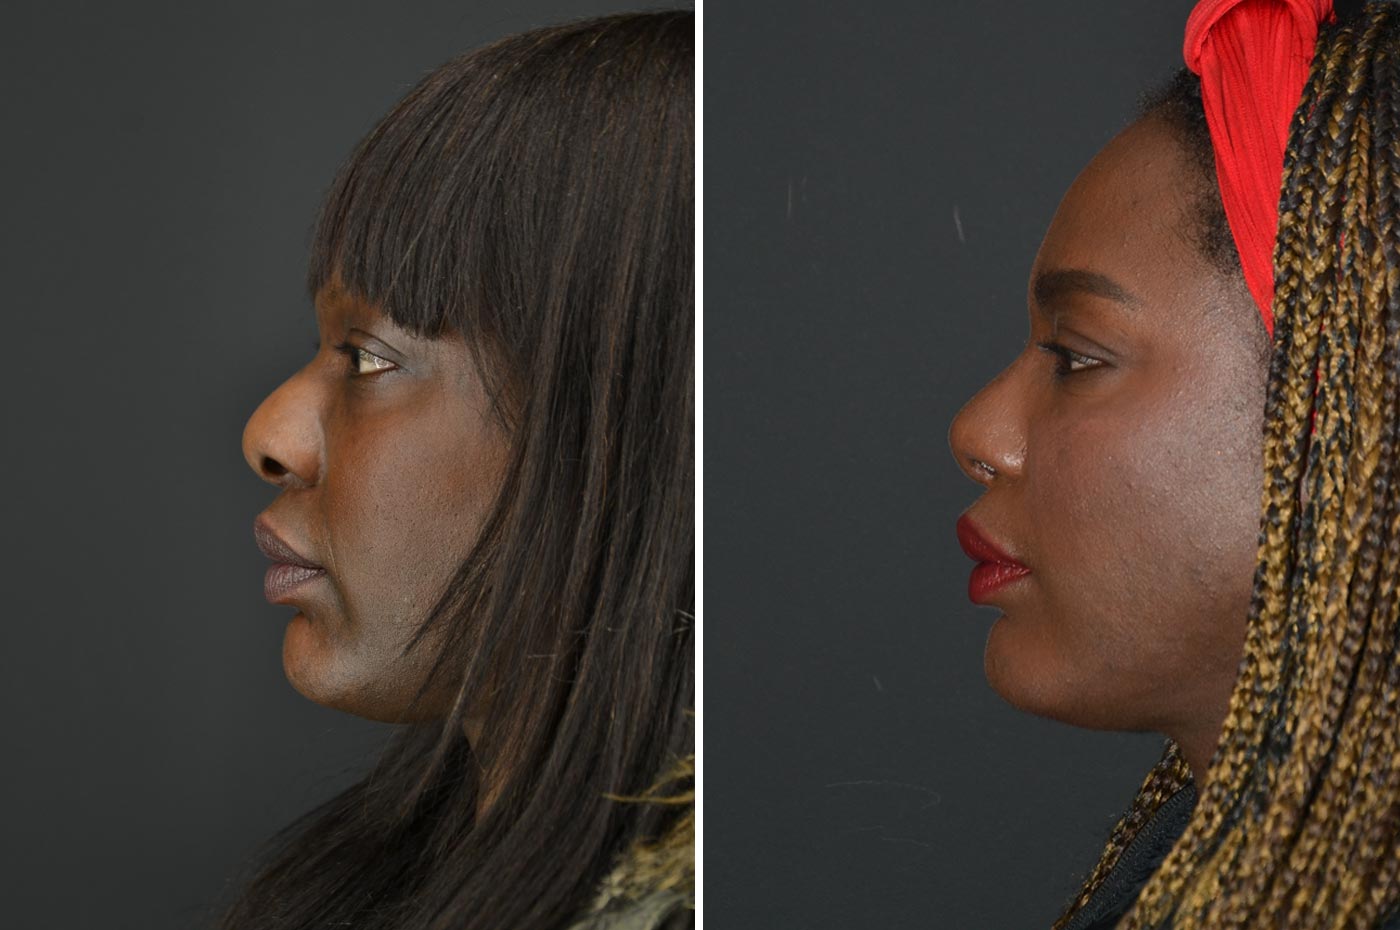 Male rhinoplasty before (left) and after (right), side view